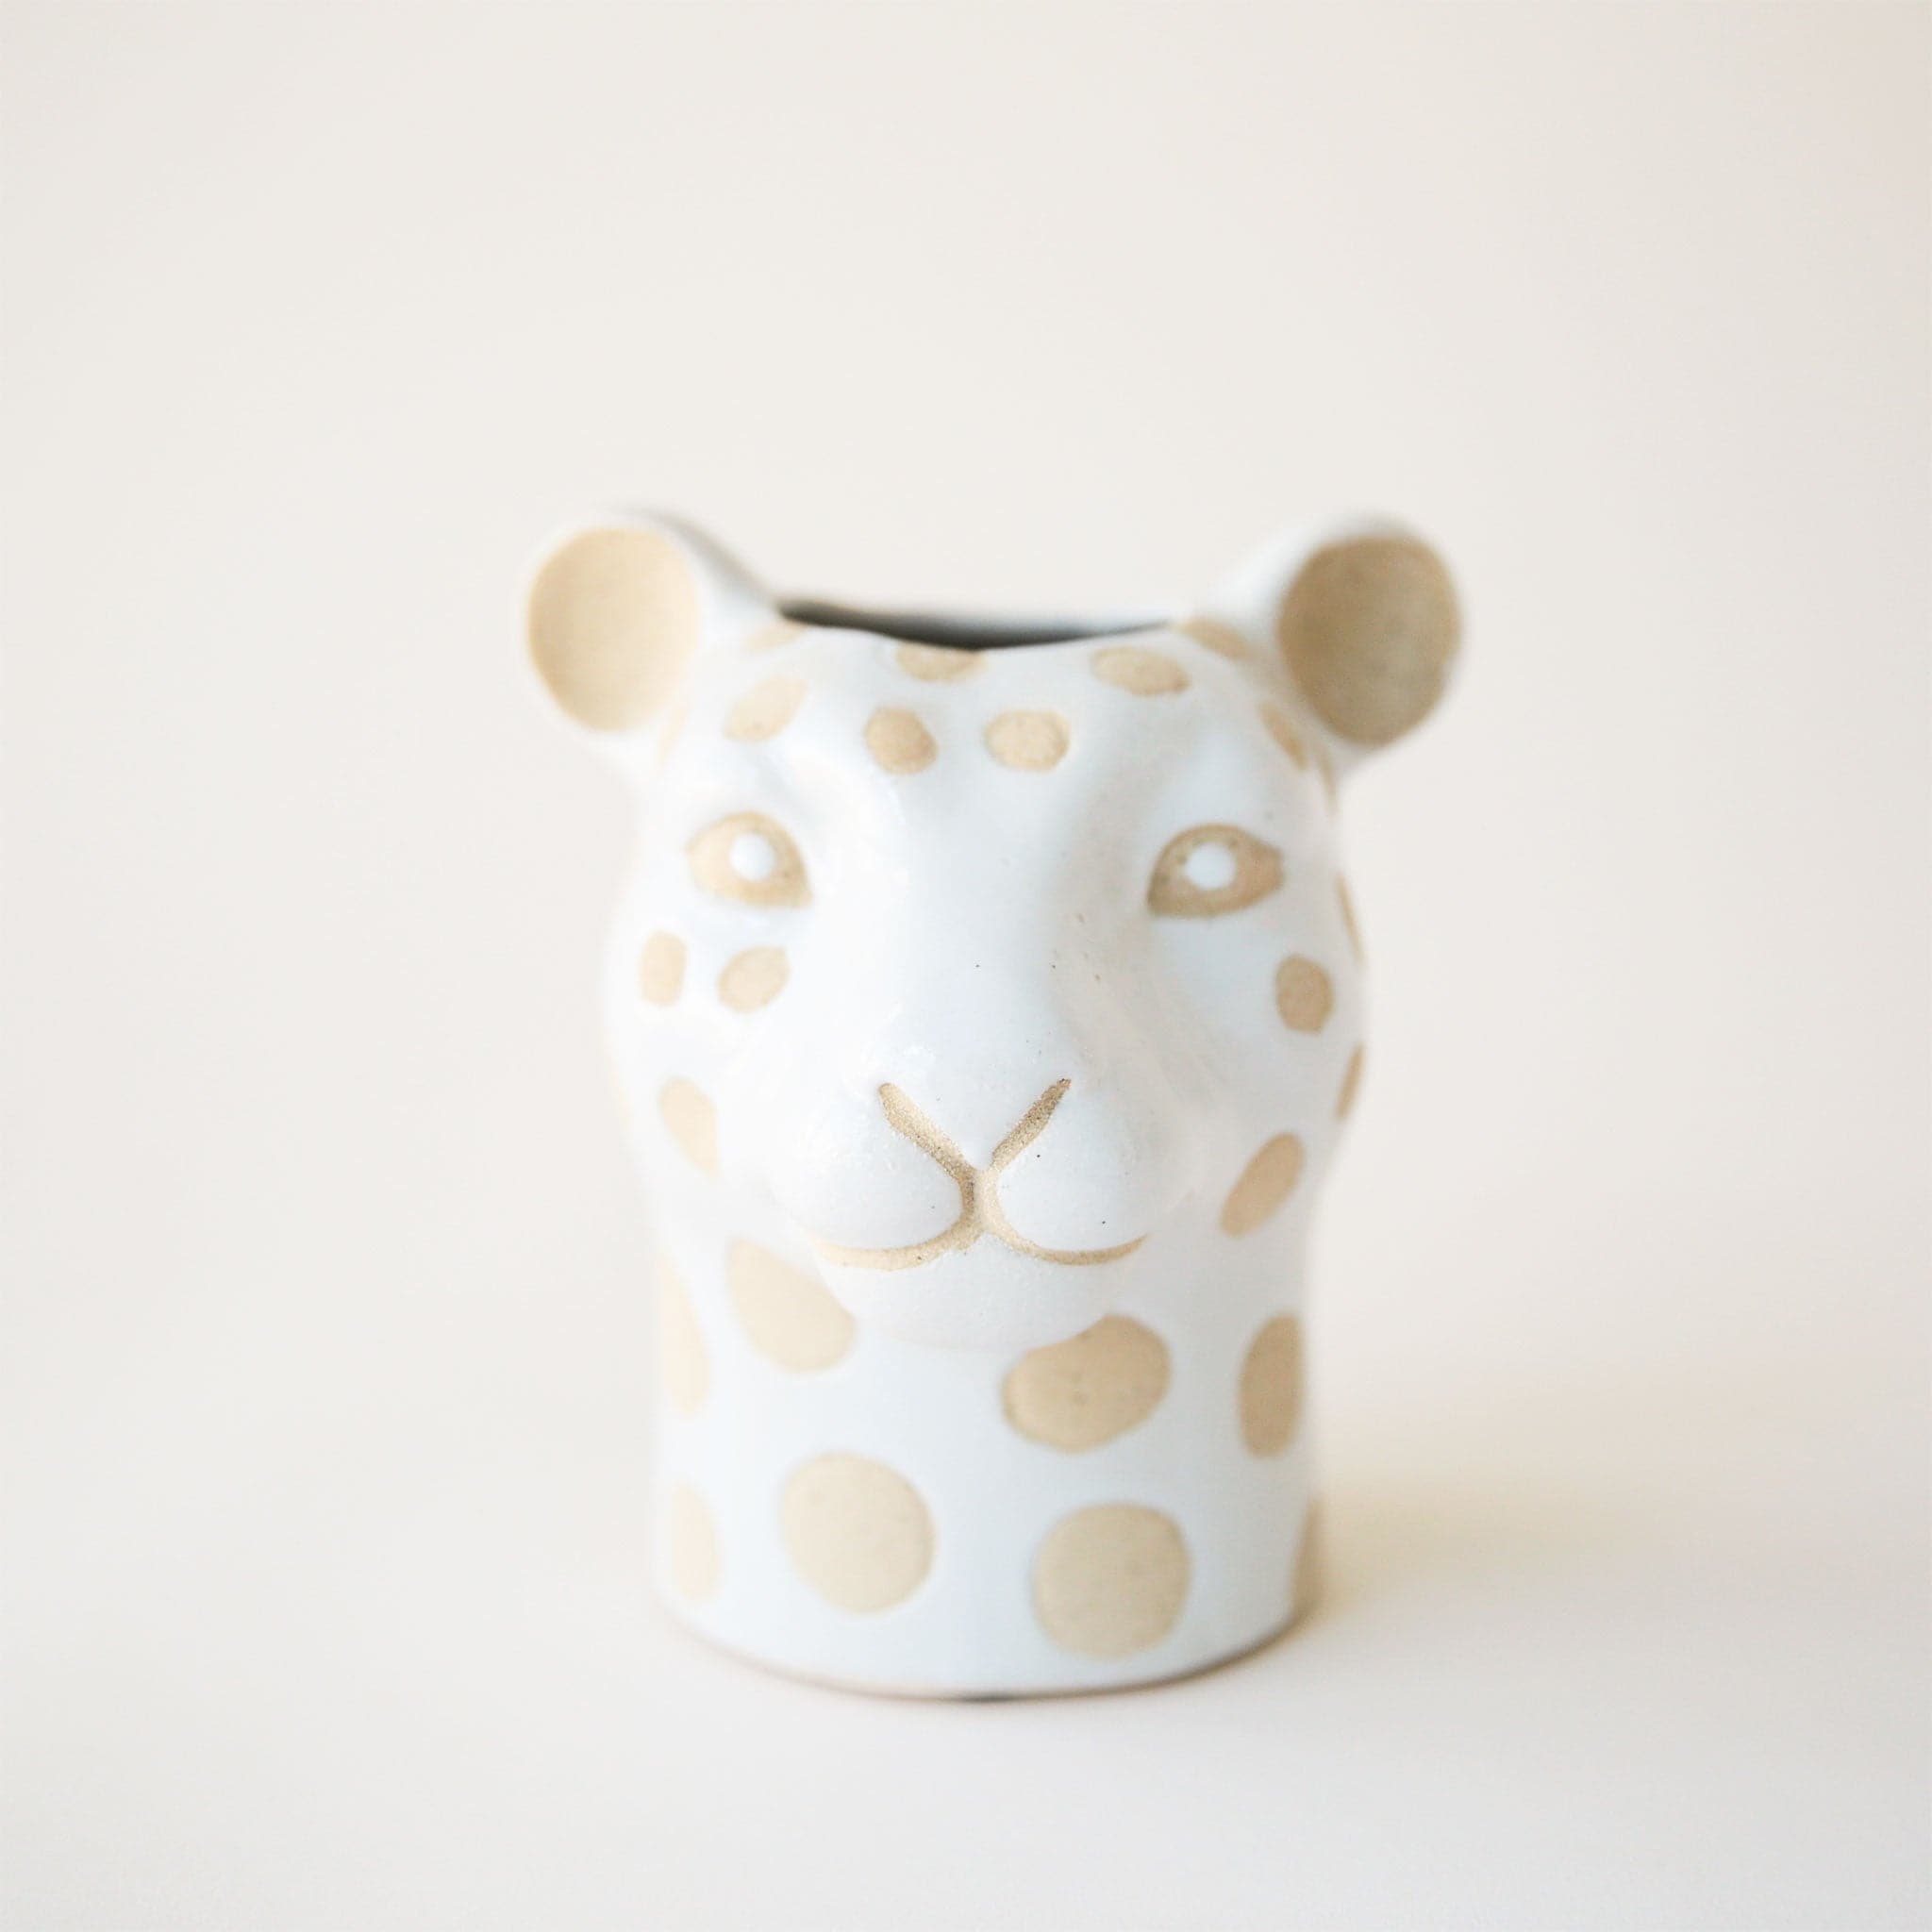 On a cream background is a leopard shaped ceramic planter with tan spots and an opening at the top.